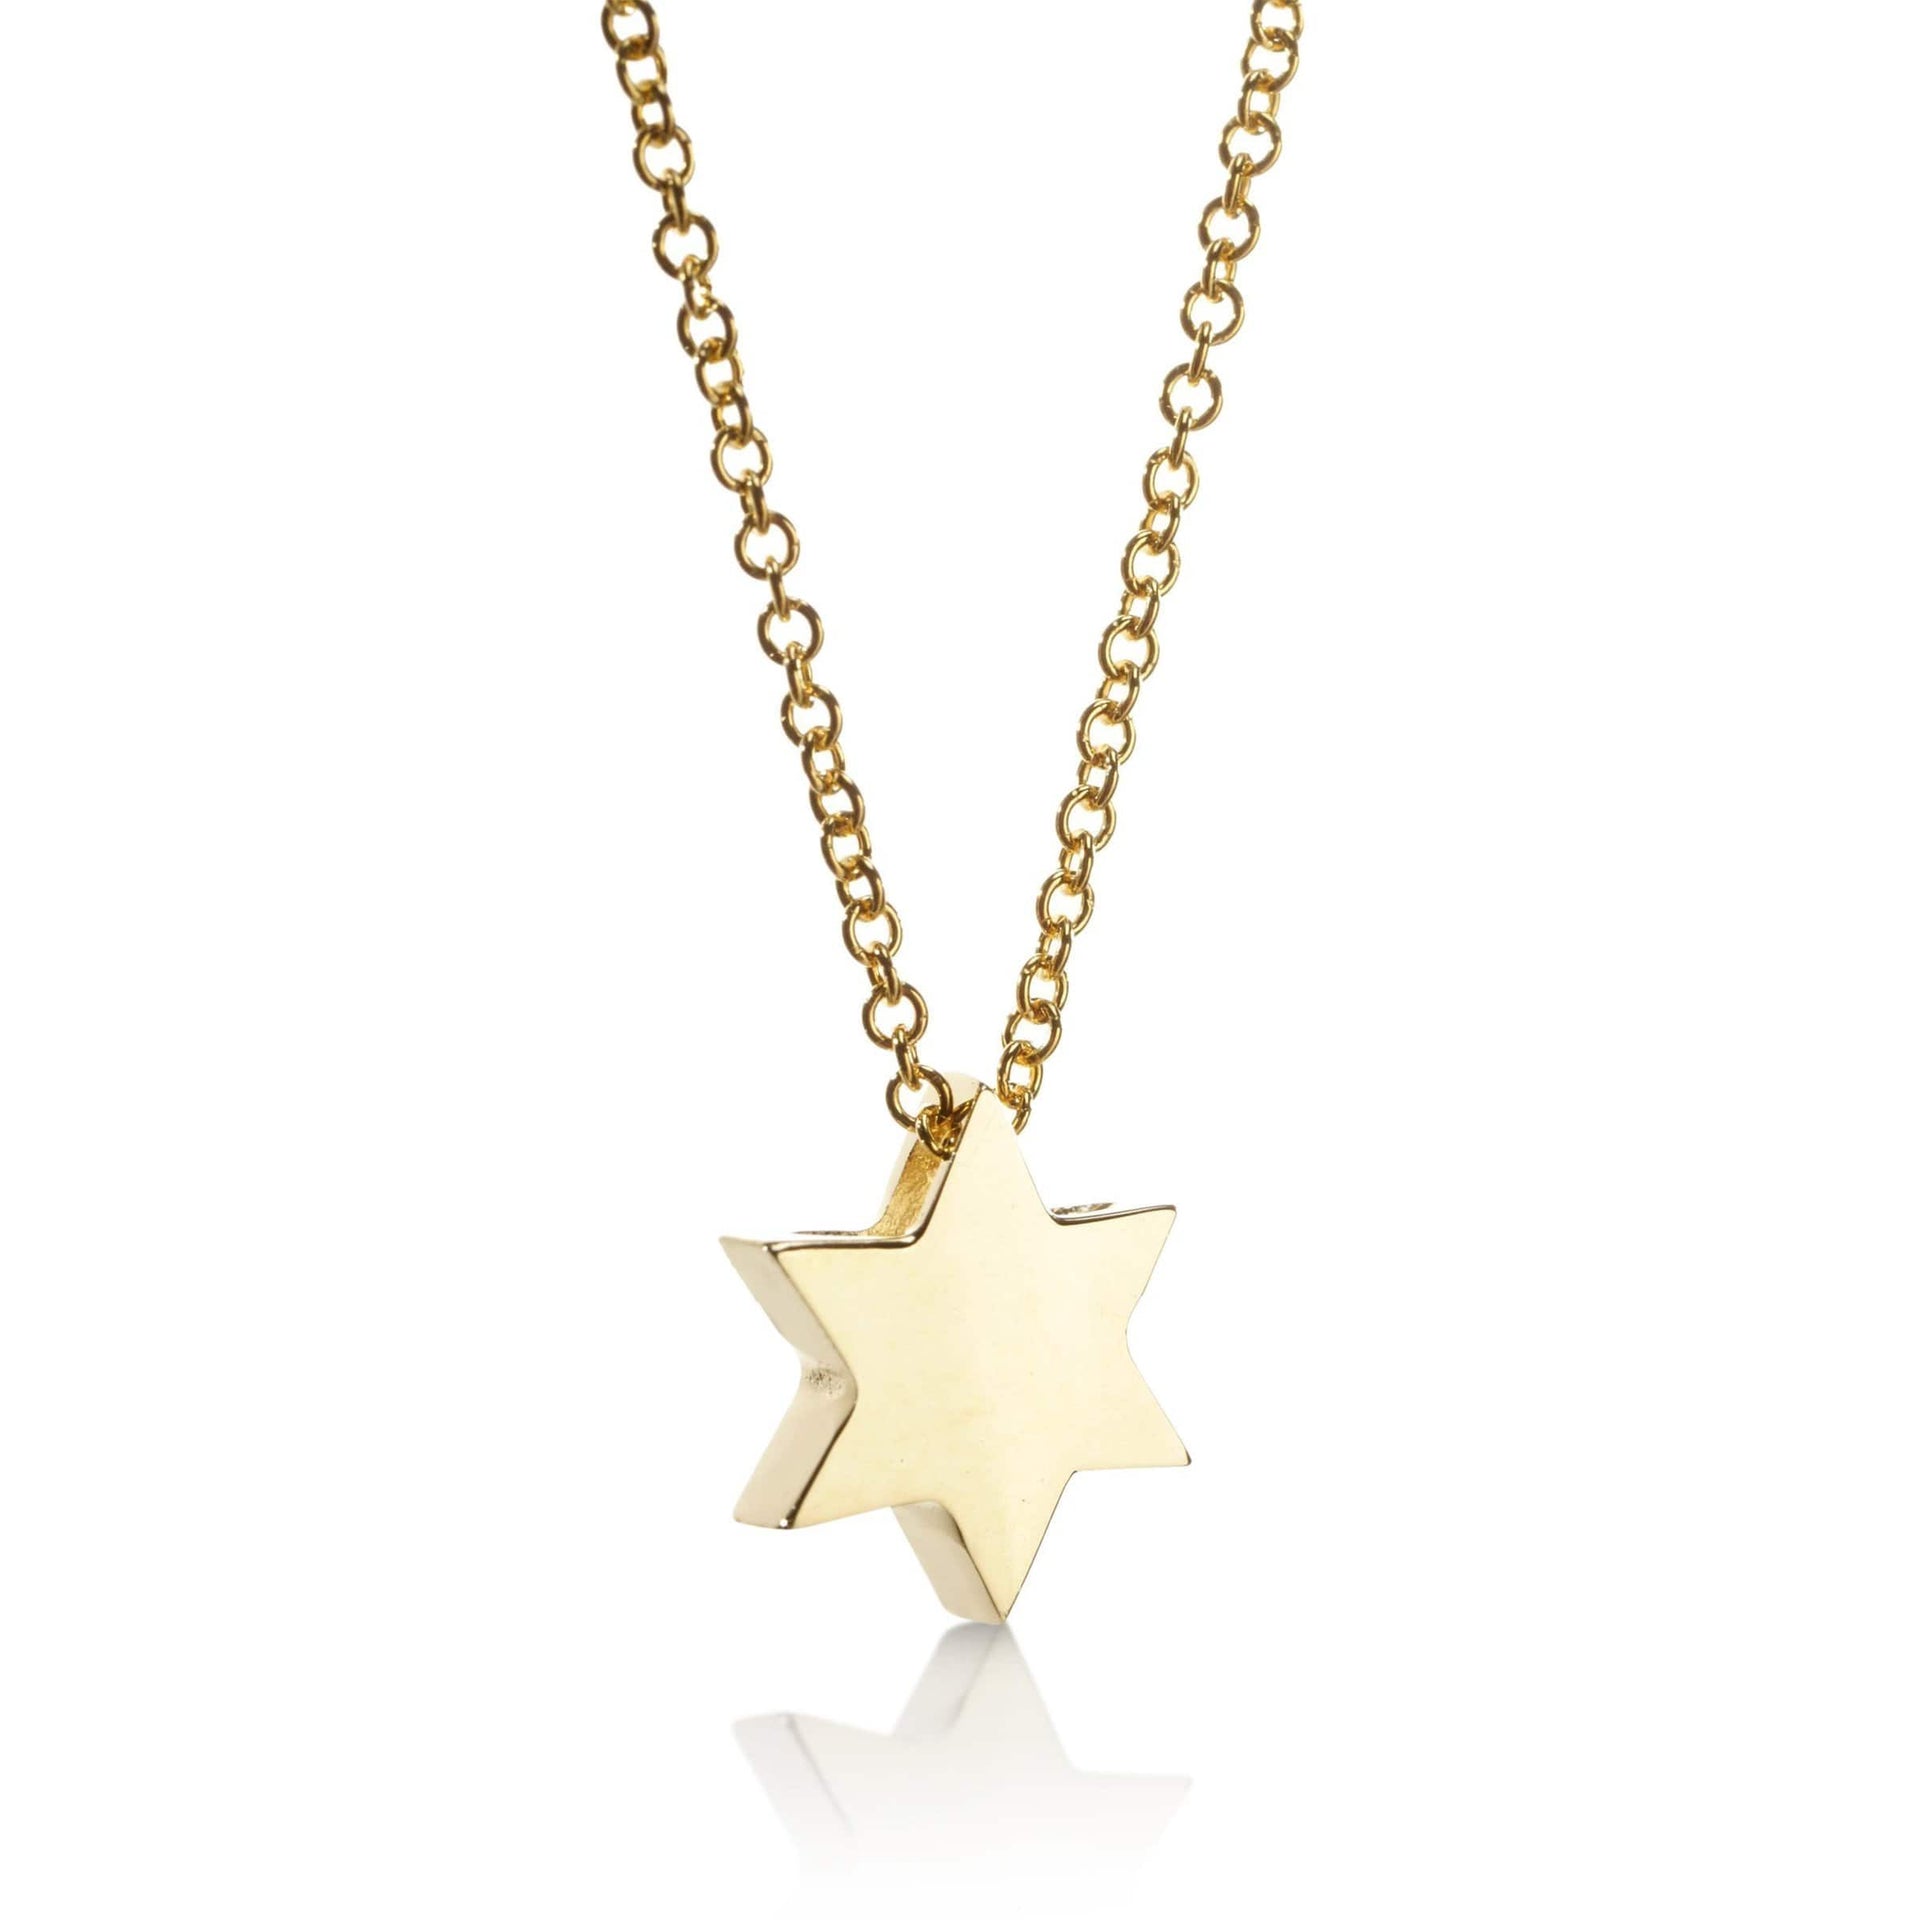 Alef Bet Necklaces 14k Gold Star of David Necklace - Gold, White Gold or Rose Gold